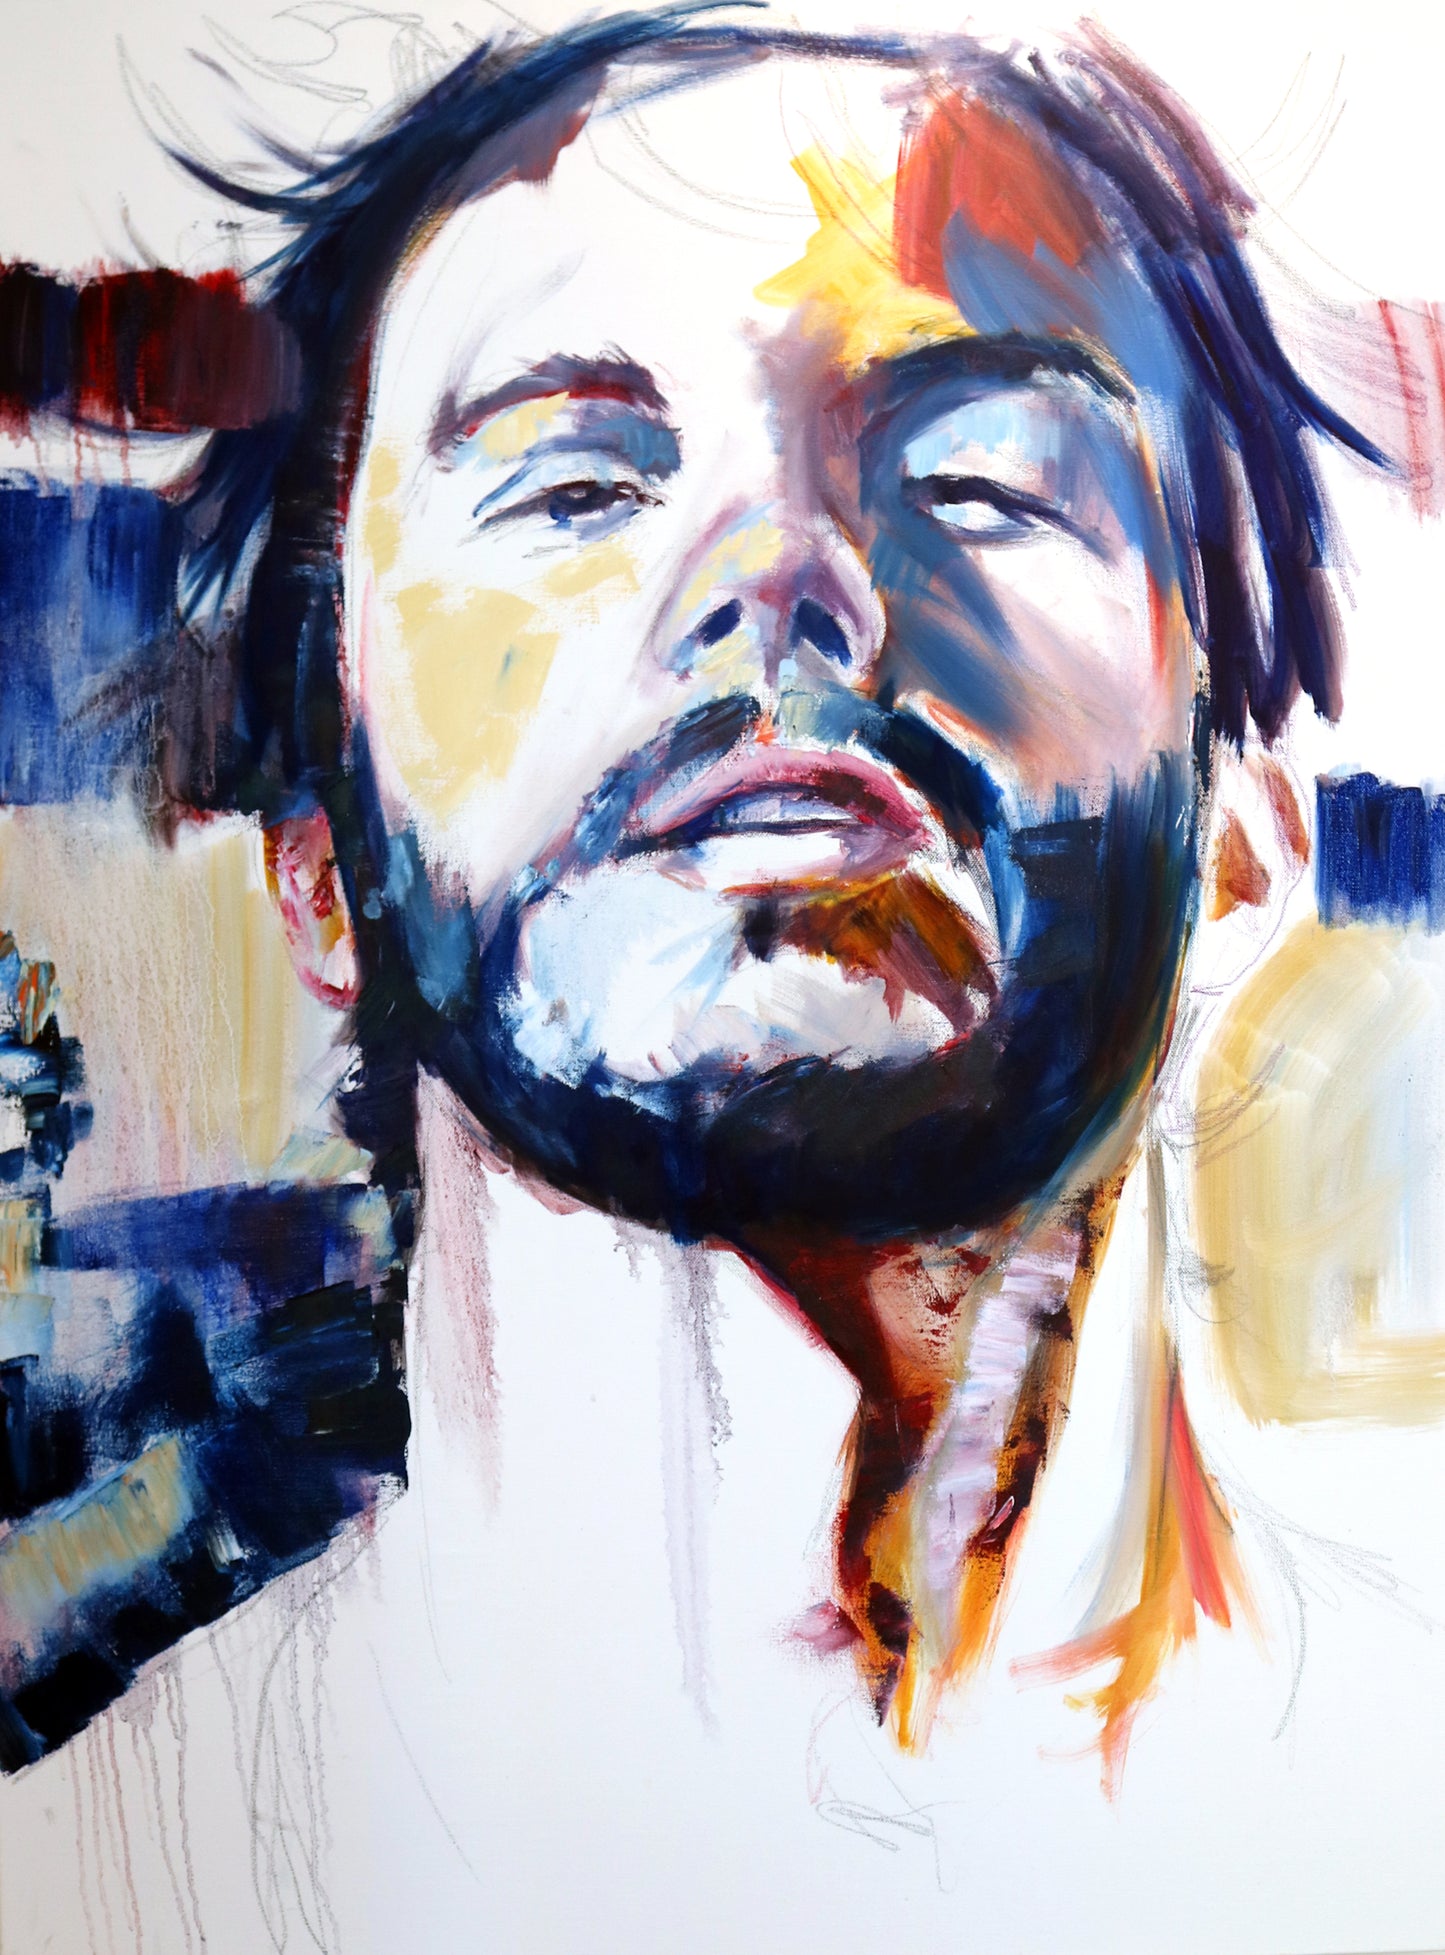 Handsome Male with Whiskered Chin and Flowing Hair - 30x40" Original Painting